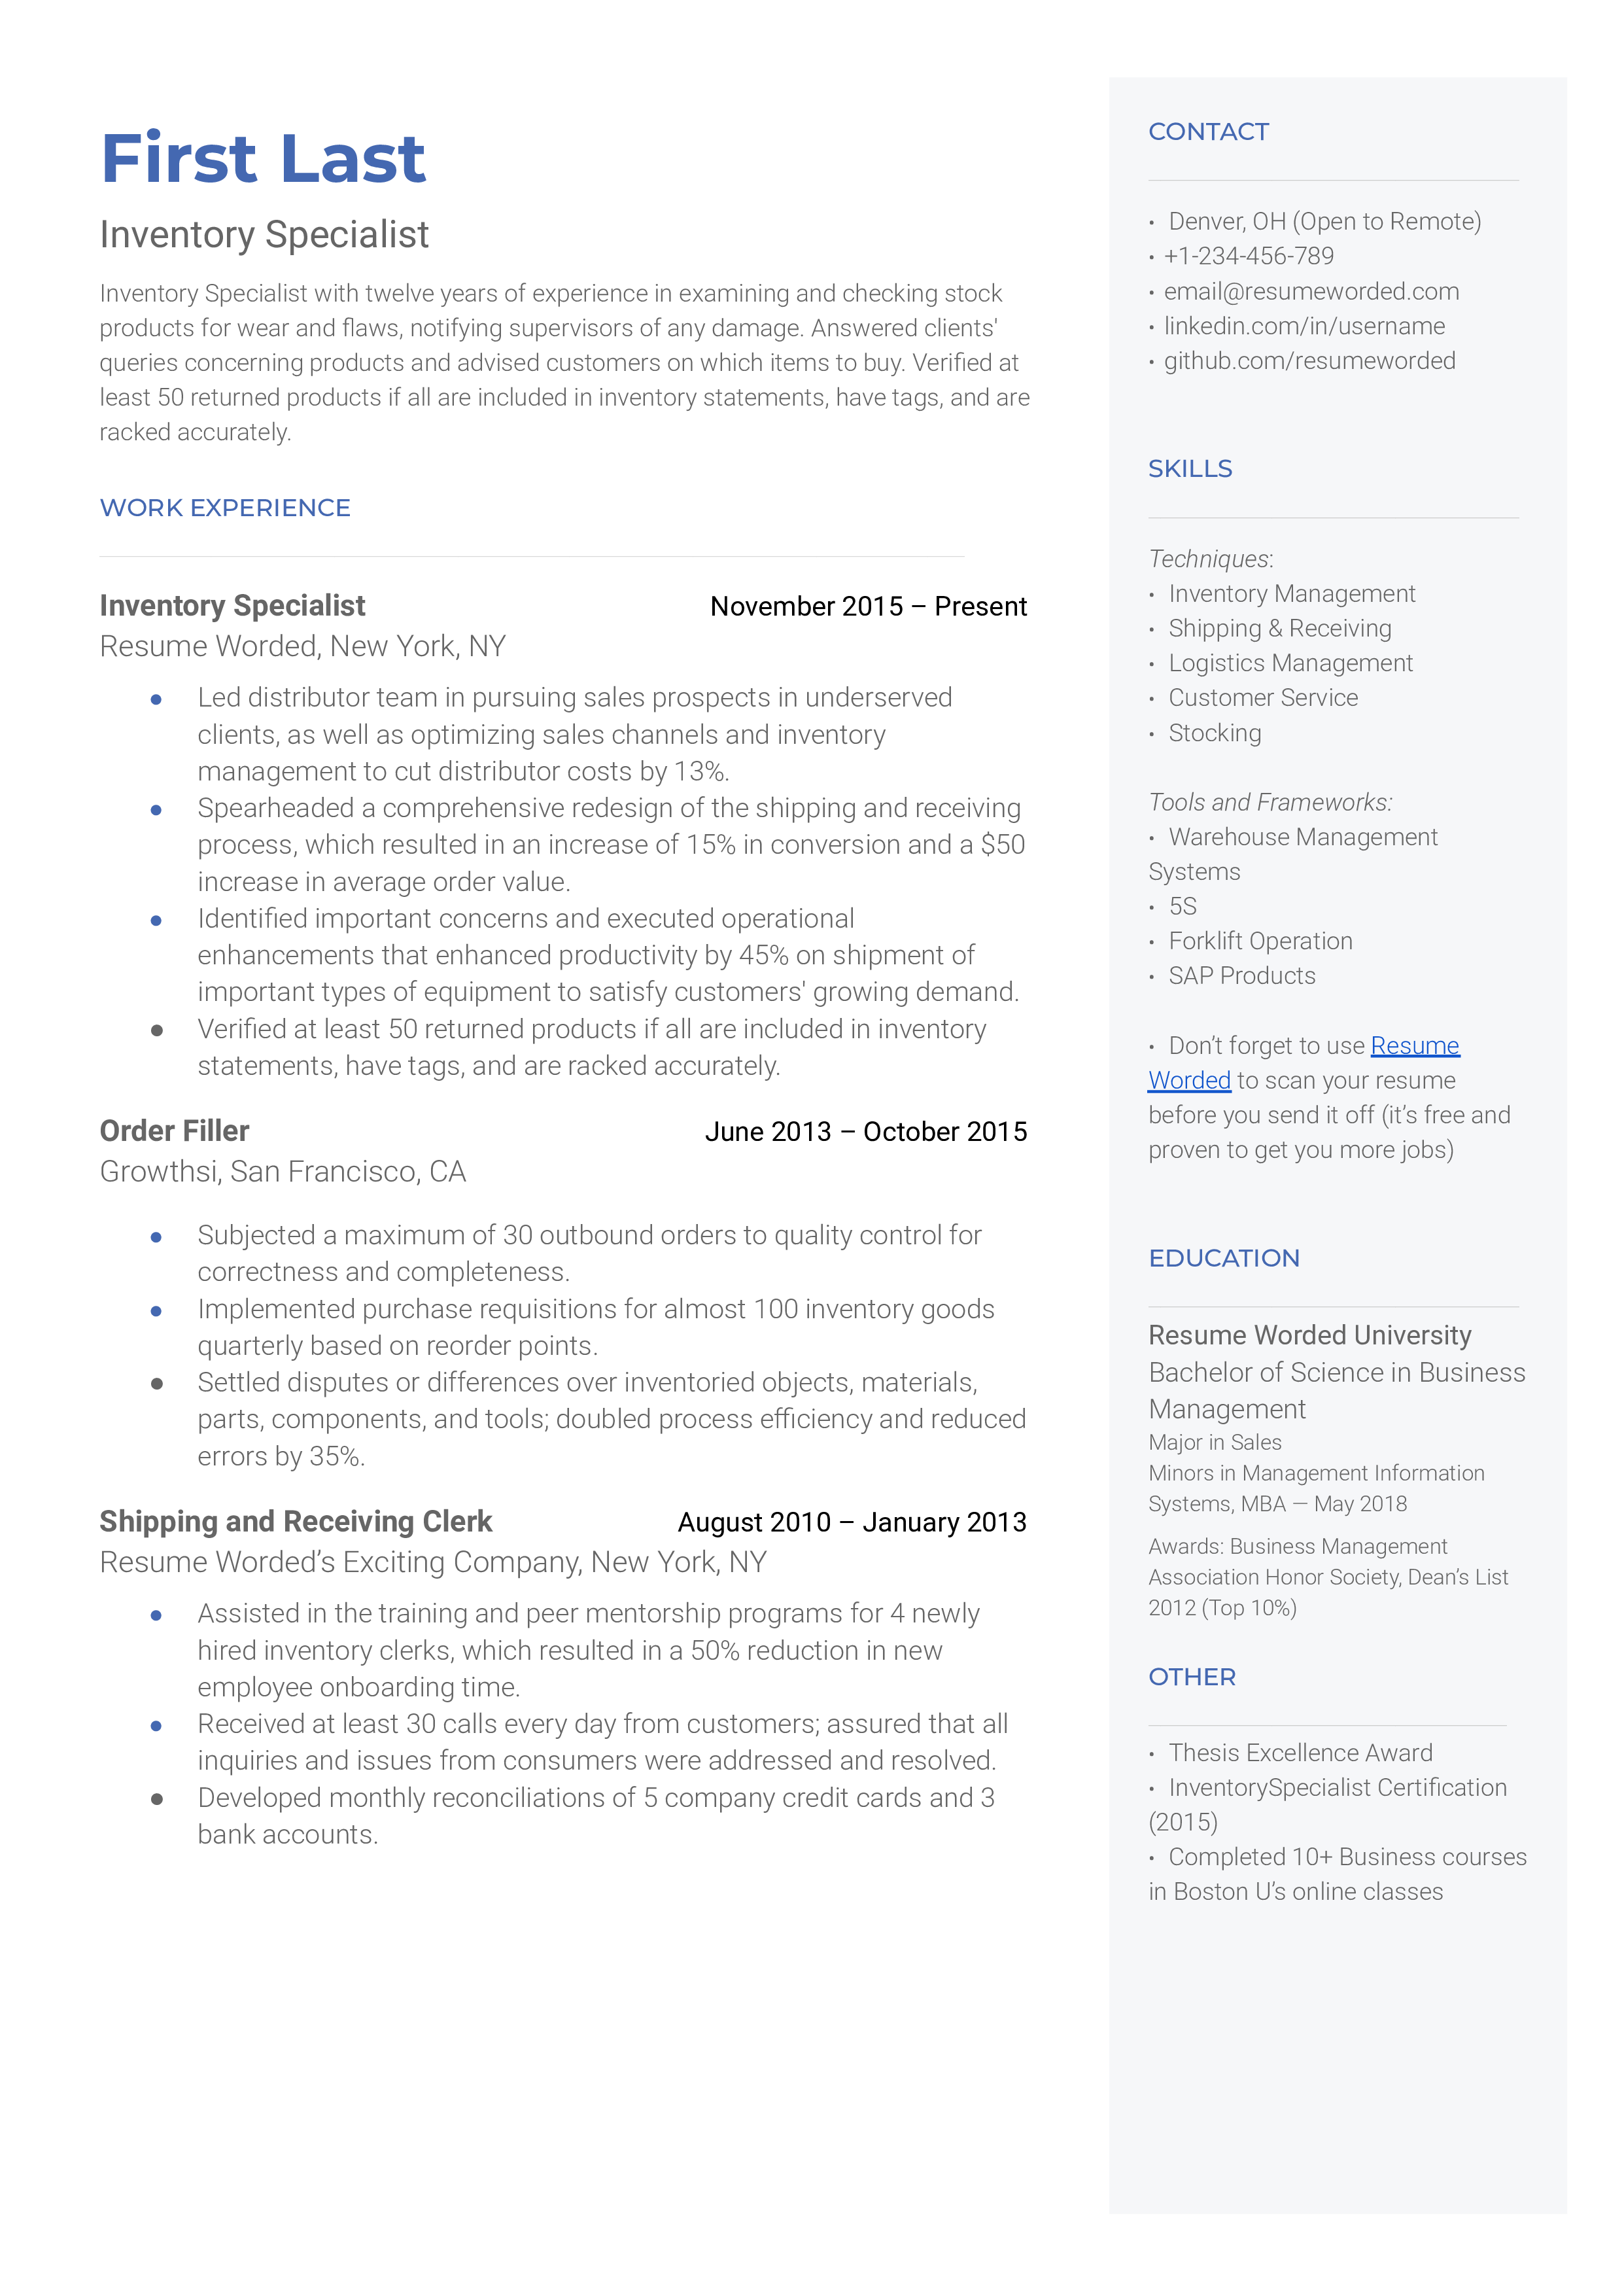 Well-structured CV of a Inventory Specialist showcasing proficiency in inventory management systems and analytical skills.